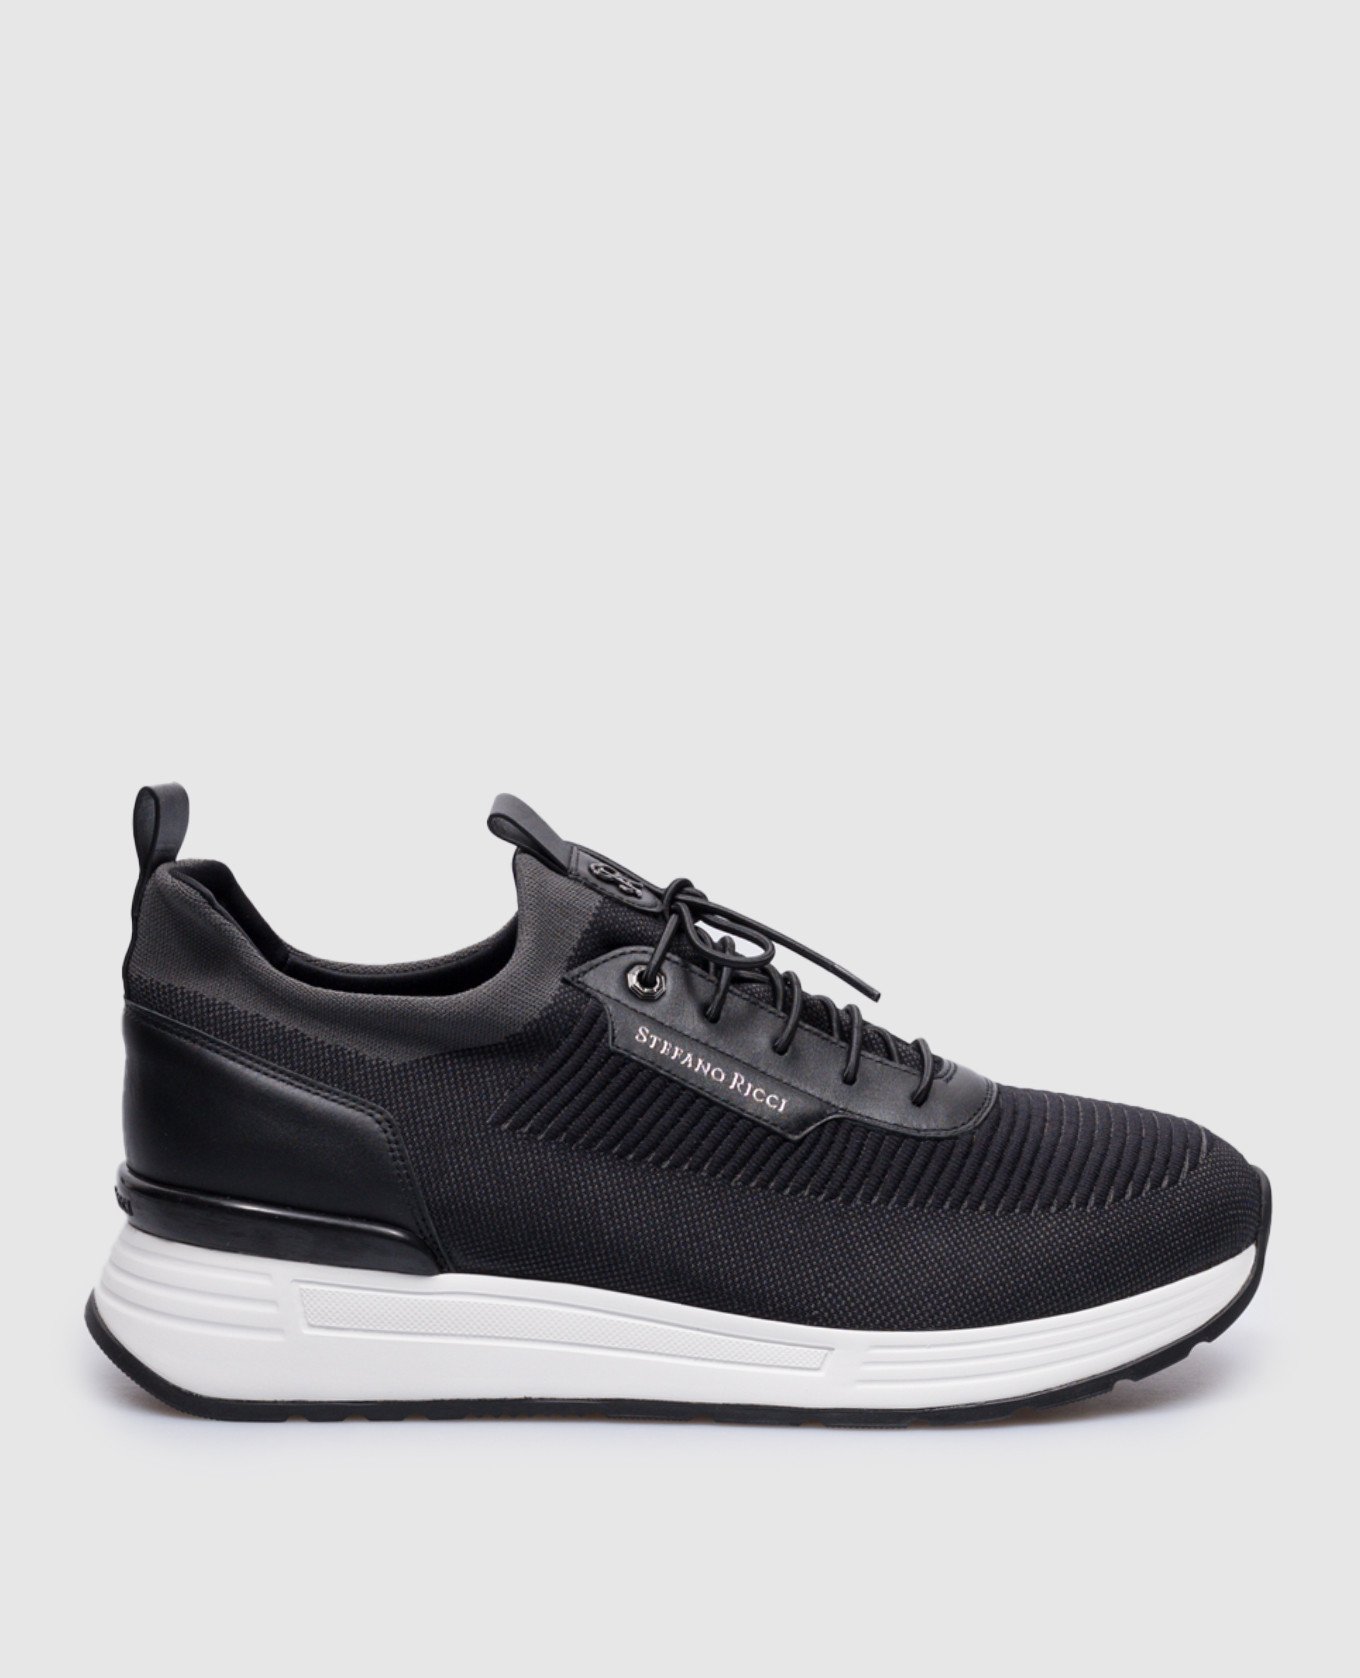 Black combination sneakers with logo